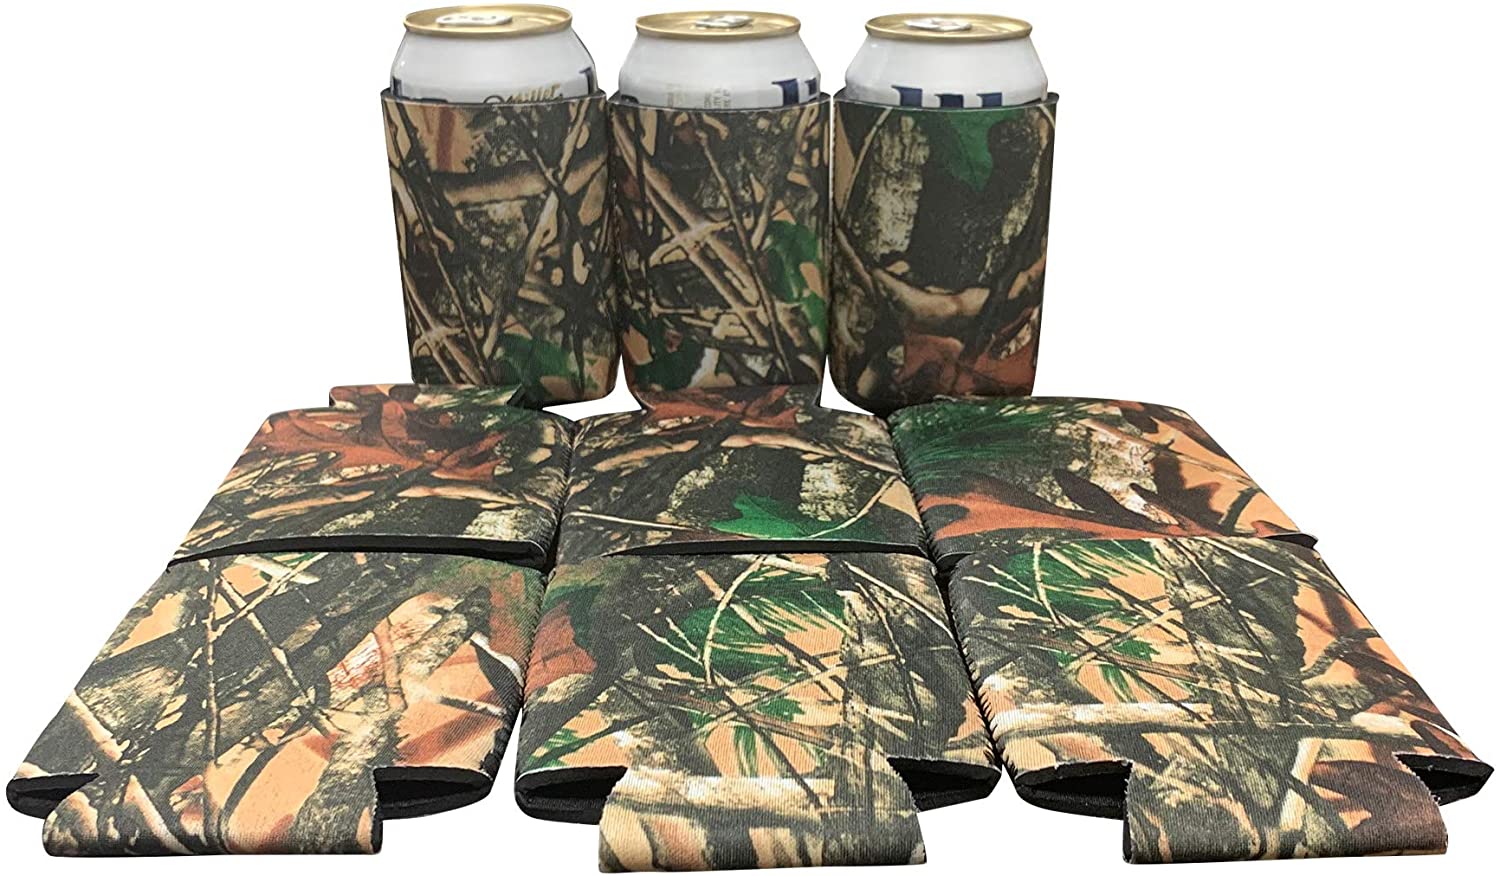 Plain Collapsible Can Coolers, $7.99 + Free Shipping - Kool Products